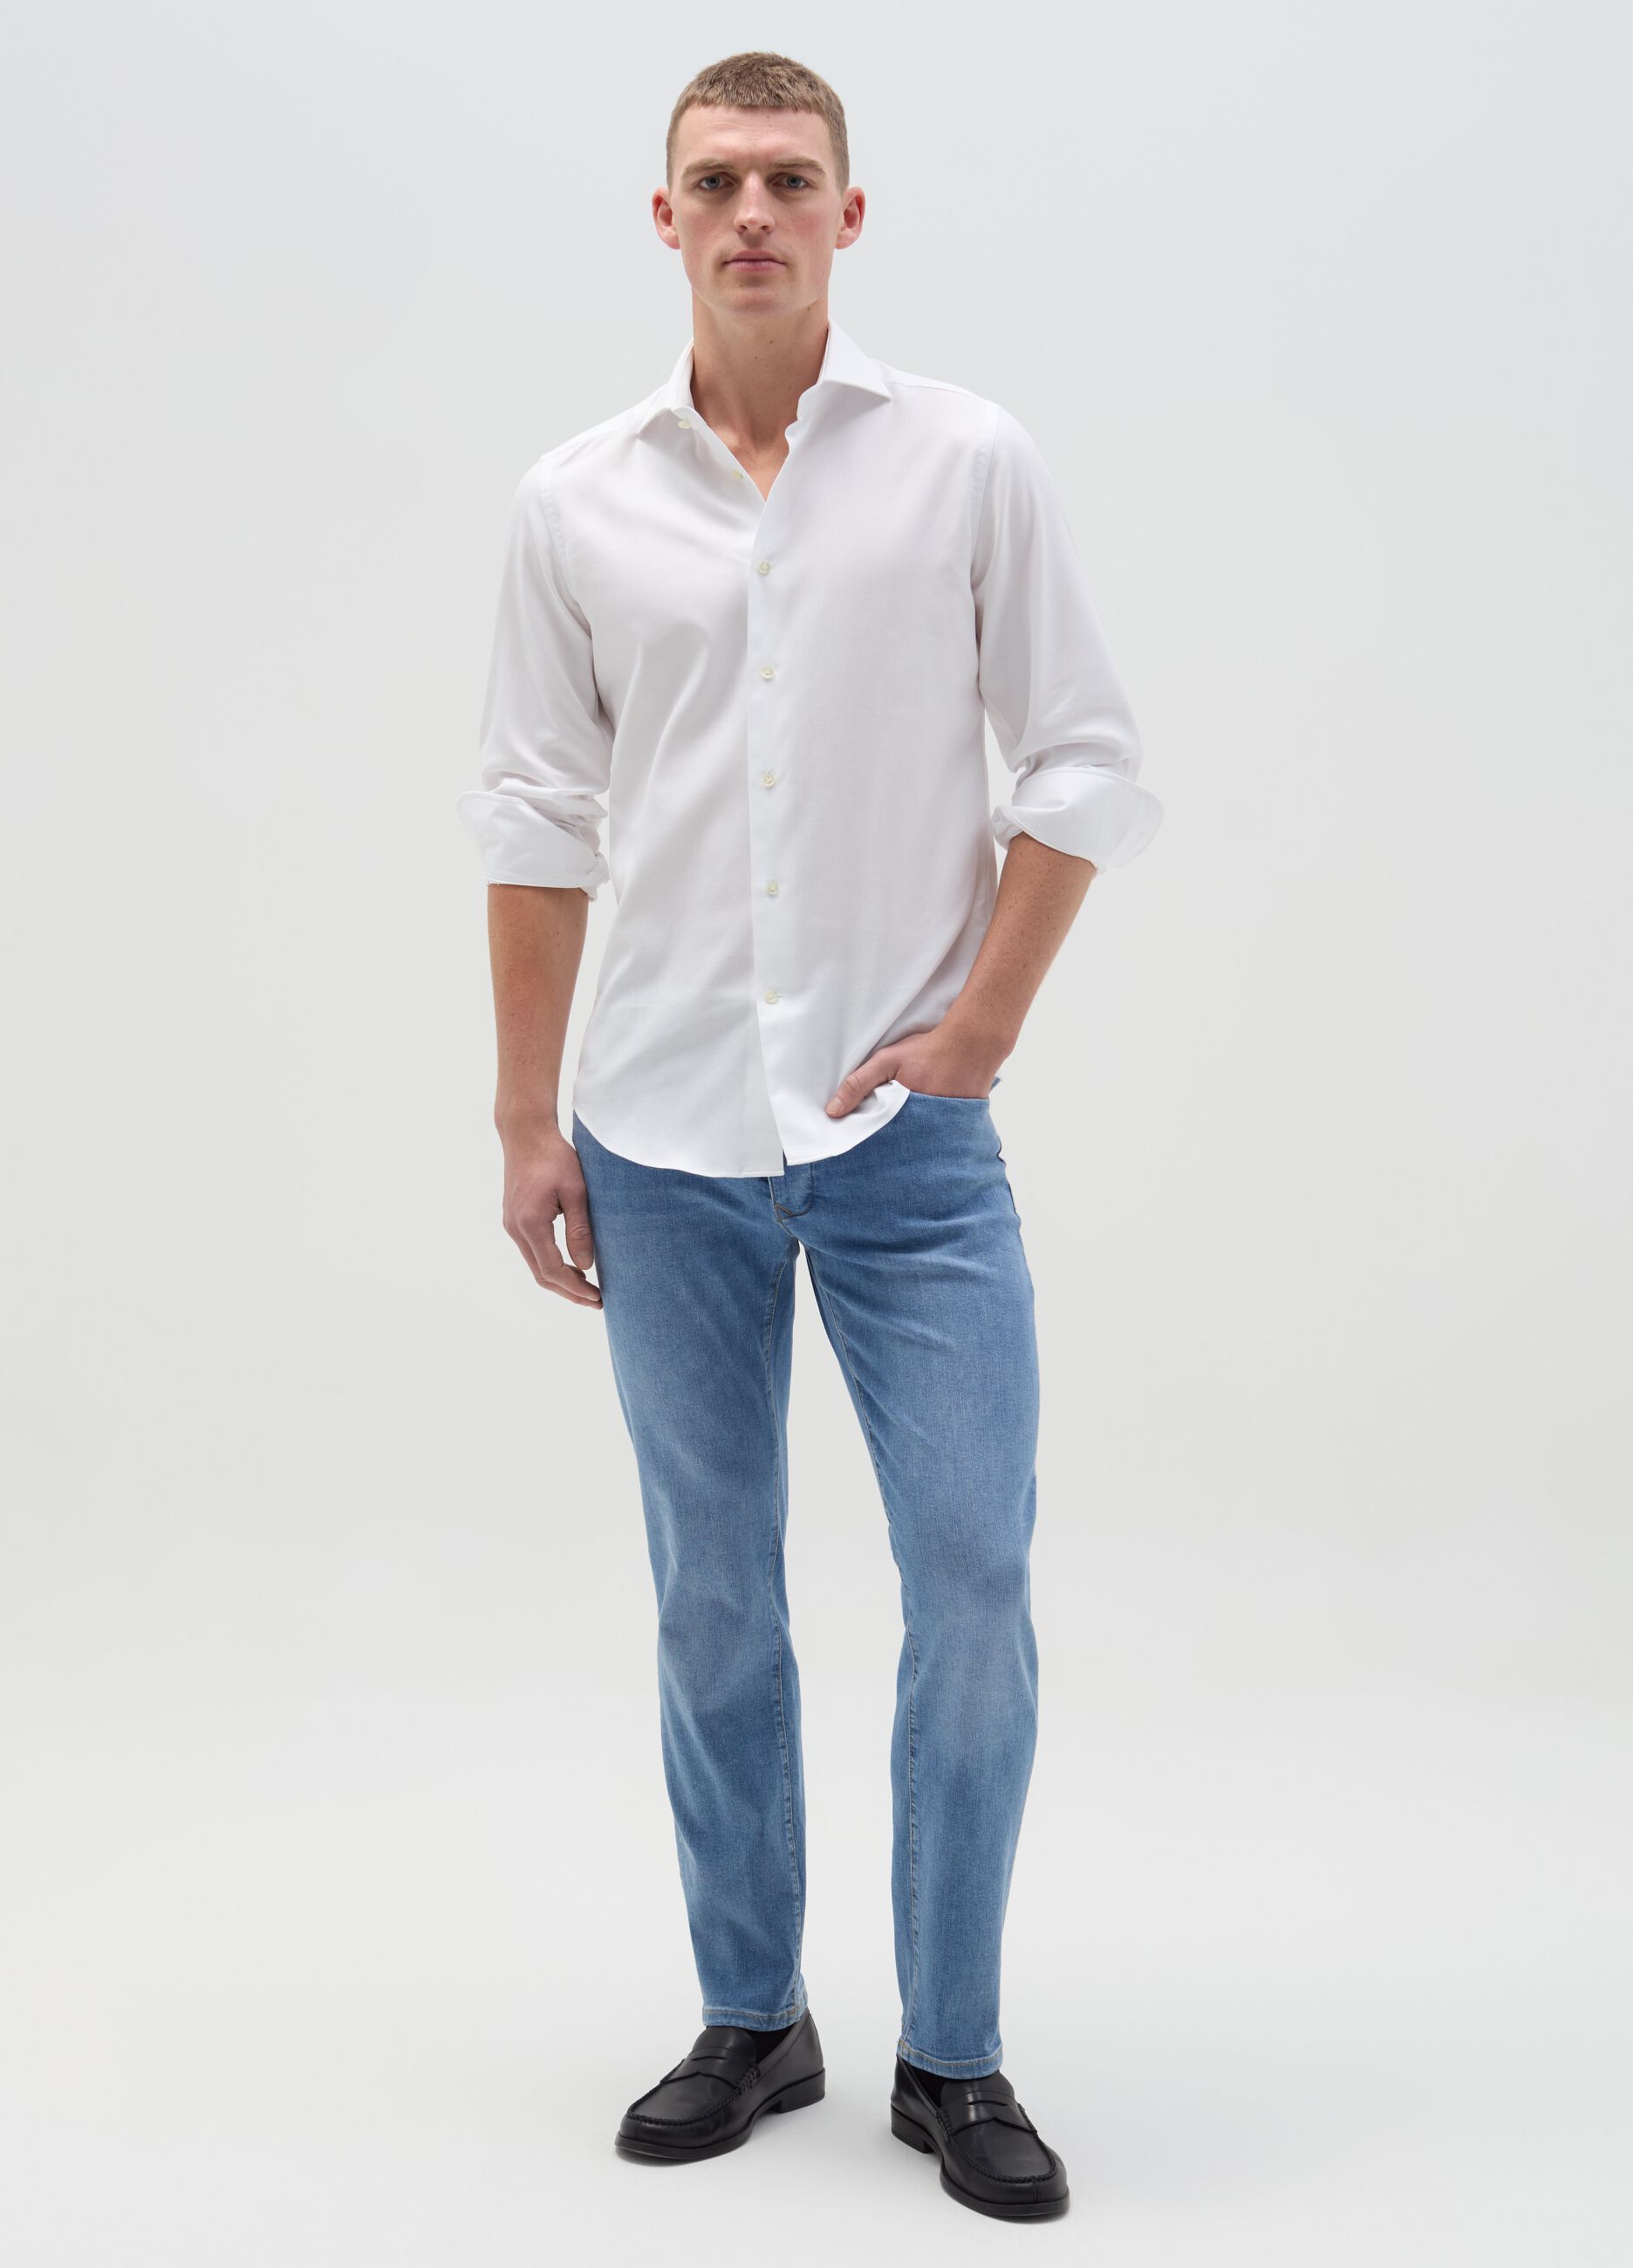 The Perfect Item slim-fit jeans